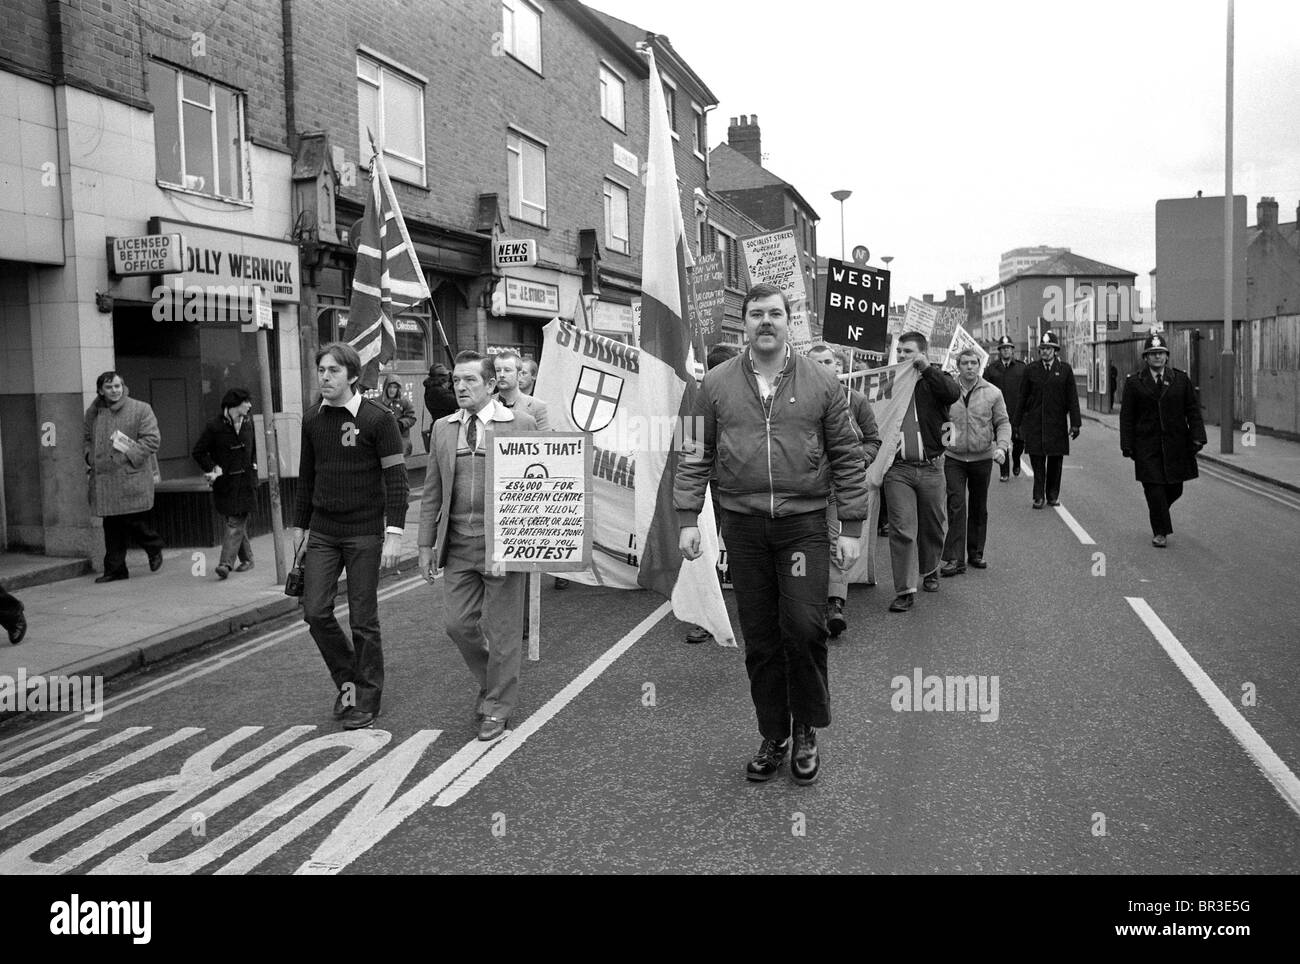 National Front march in Wolverhampton 1981 Local council NF Kandidat Eric Shaw in der Mitte. Foto von Dave Bagnall. Stockfoto